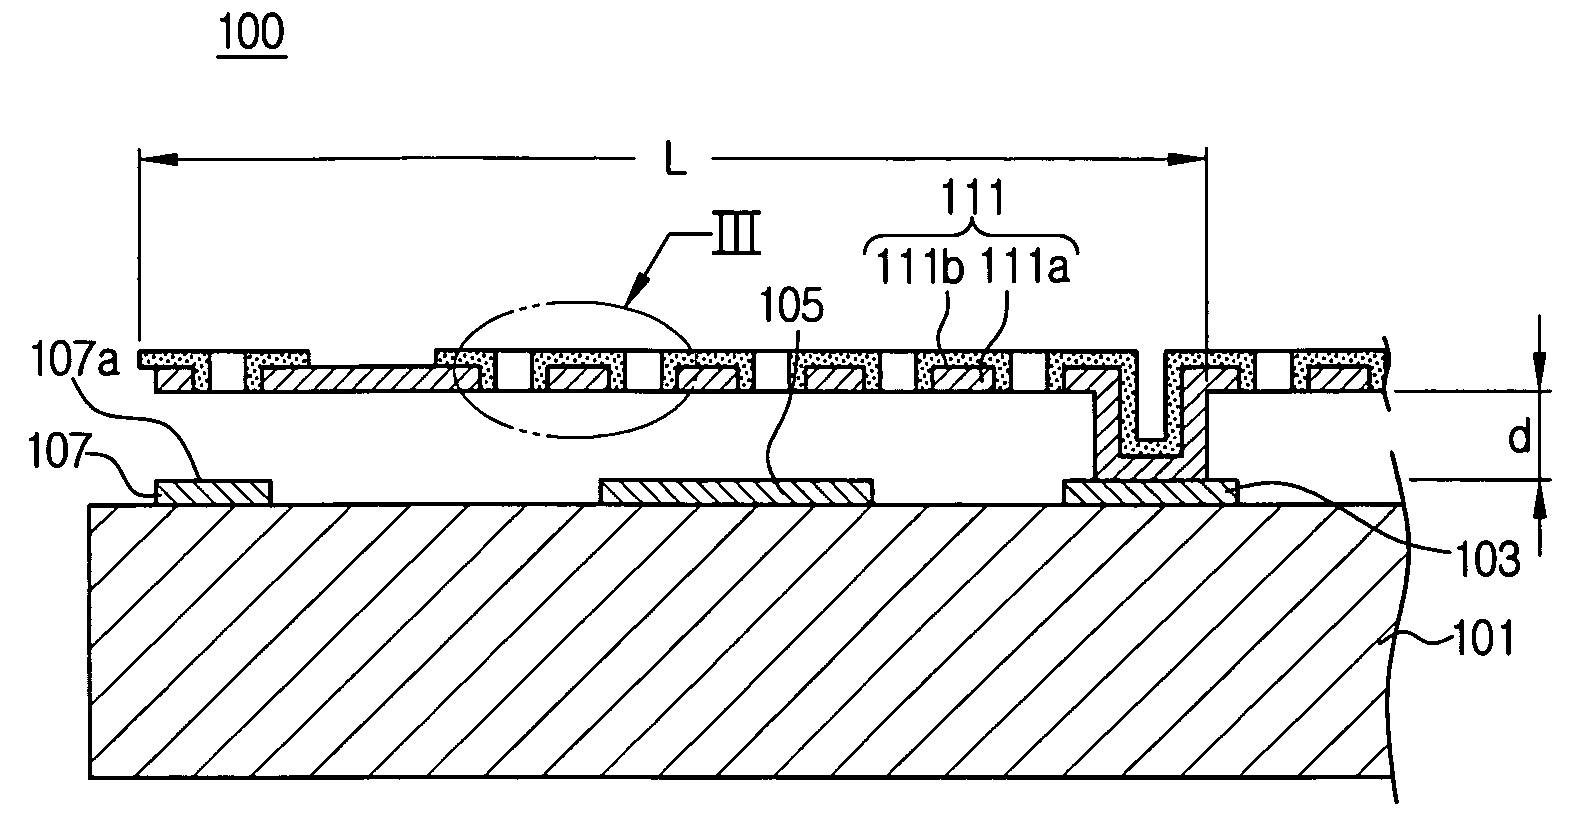 Micro thin-film structure, MEMS switch employing such a micro thin-film, and method of fabricating them